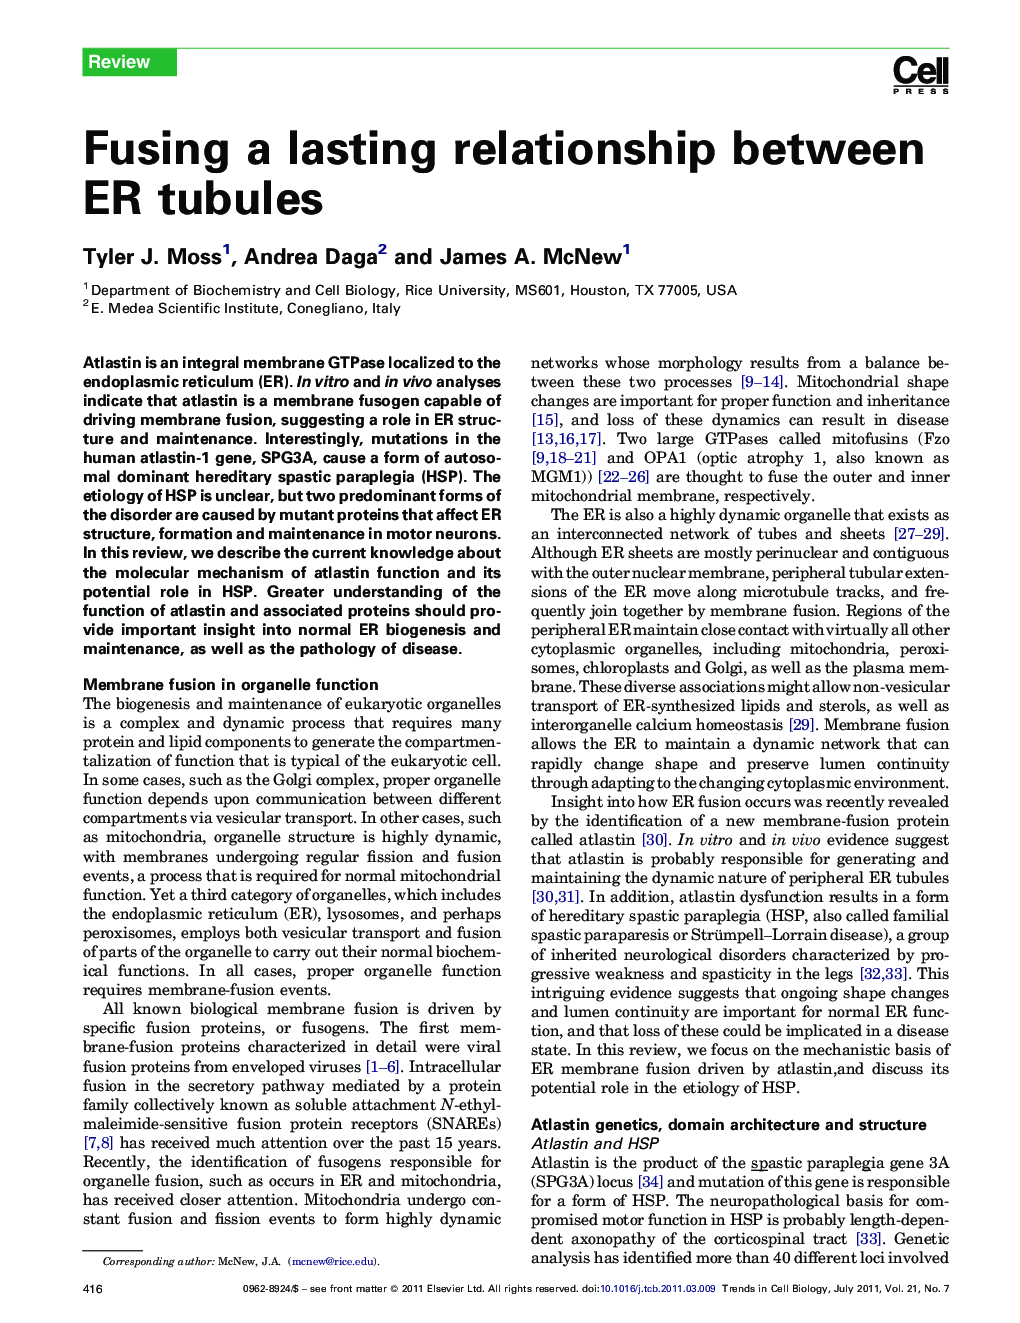 Fusing a lasting relationship between ER tubules